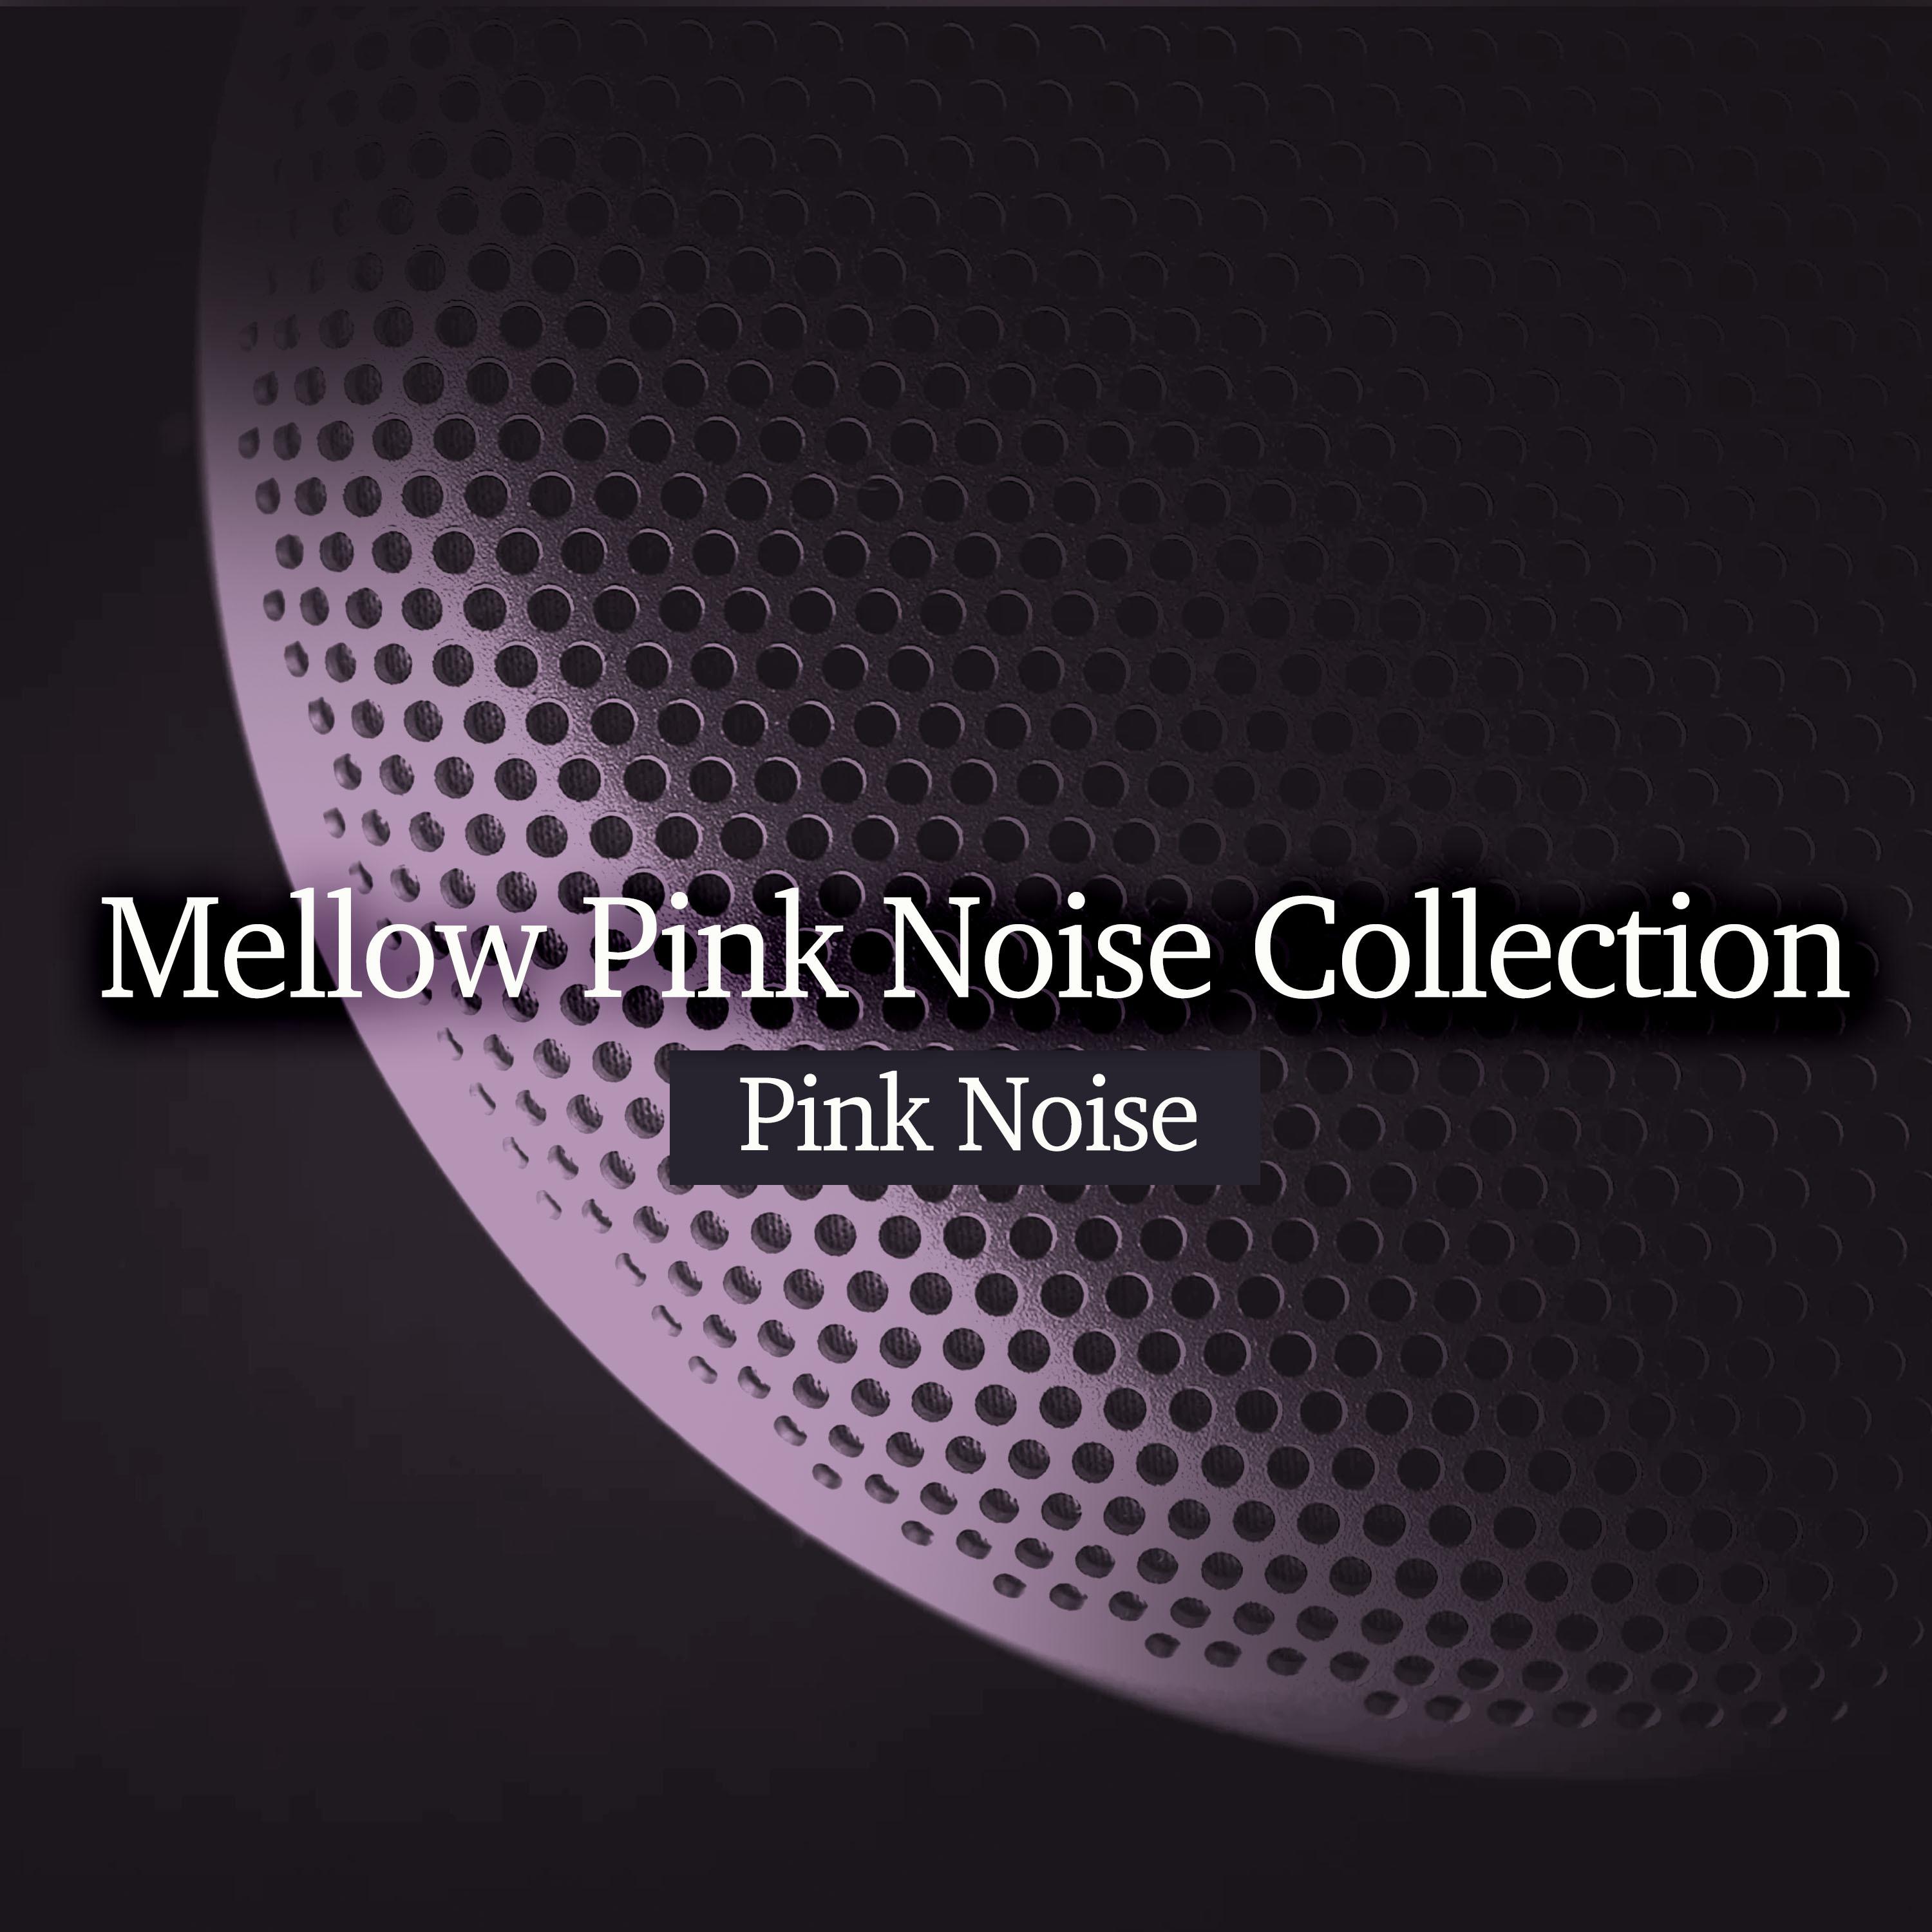 Mellow Pink Noise Collection